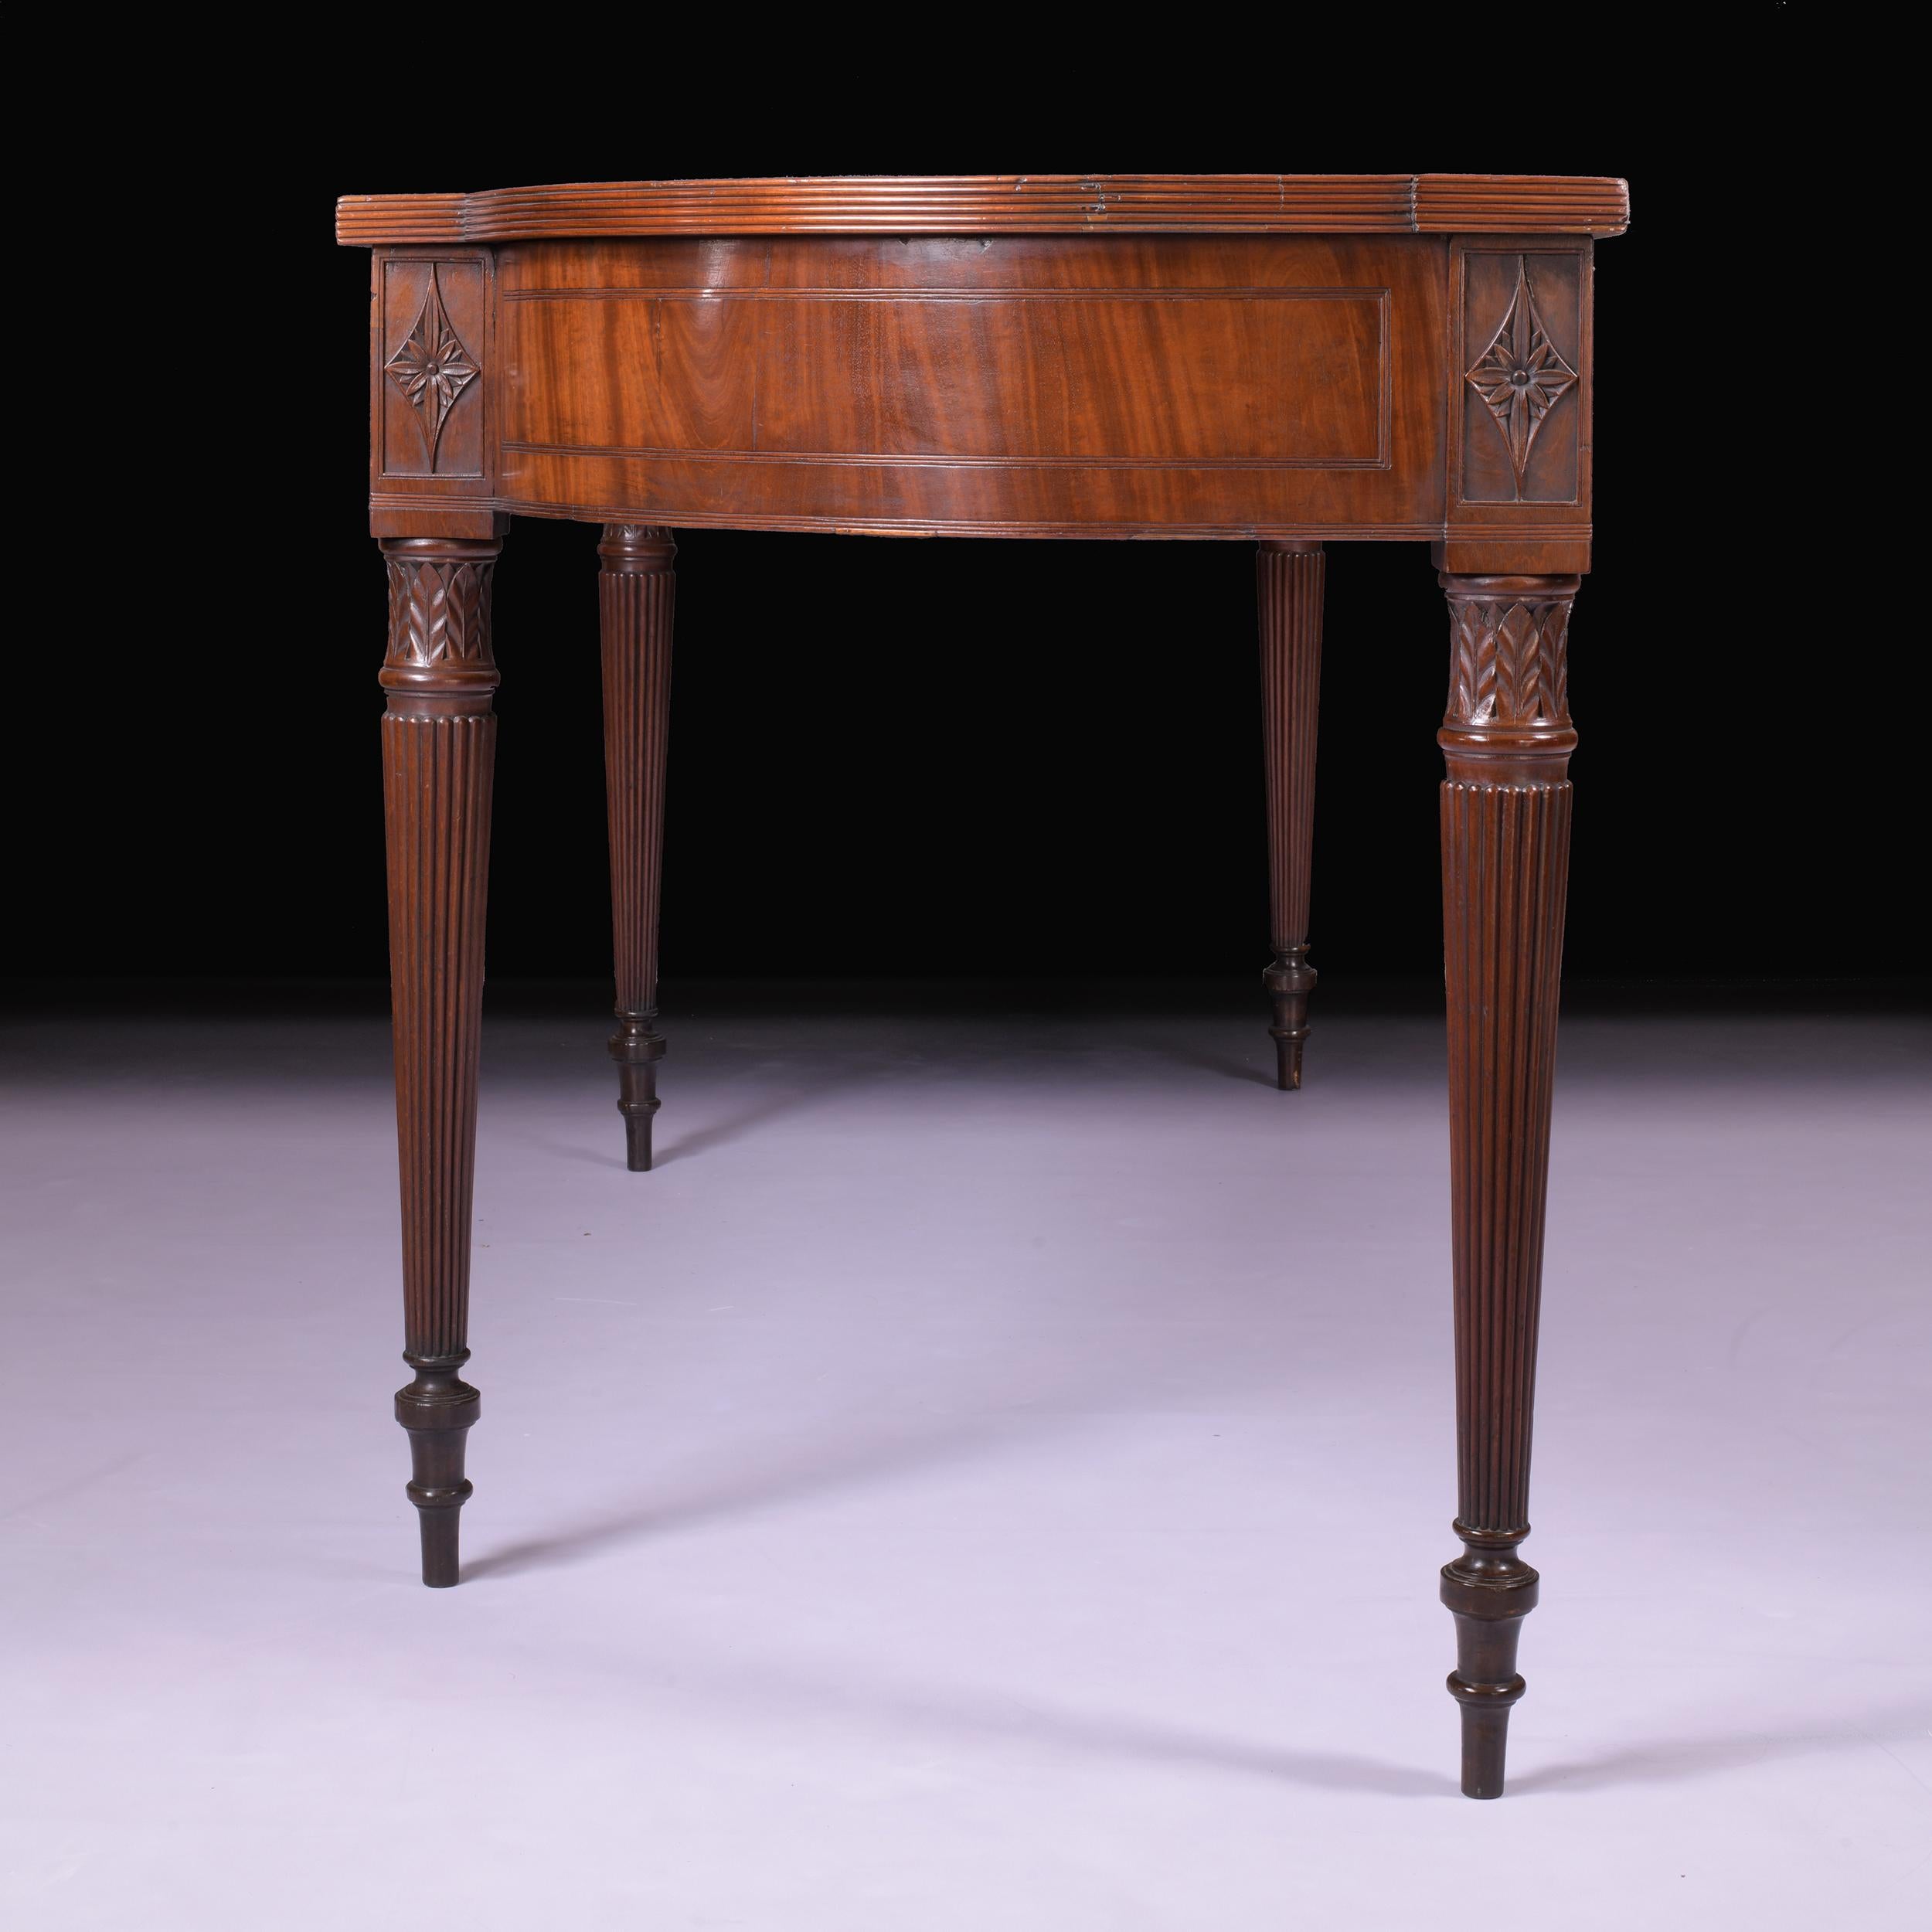 19th Century English Regency Serving / Console Table Attributed to Gillows 1